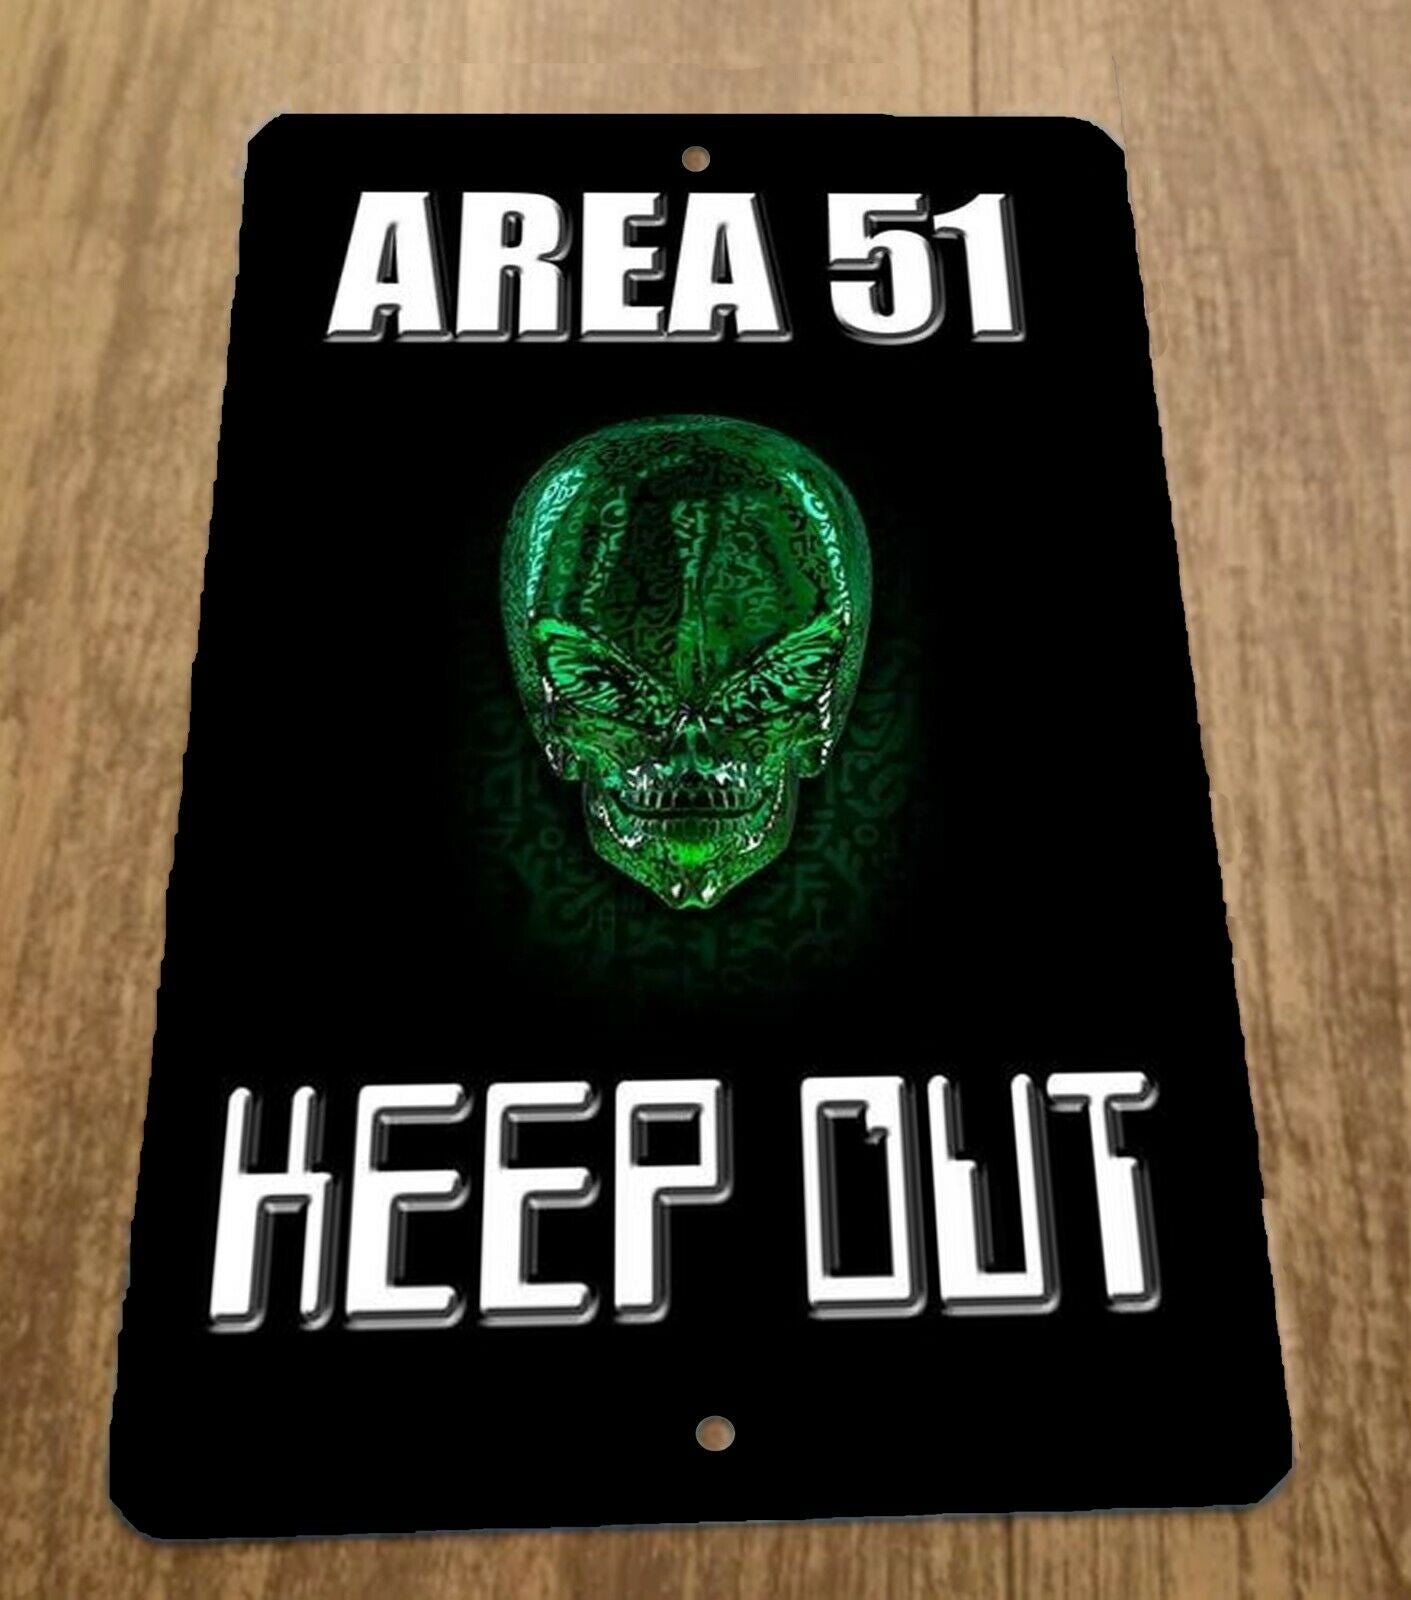 Area 51 Keep Out Aliens 8x12 Metal Wall Vintage Misc Poster Sign